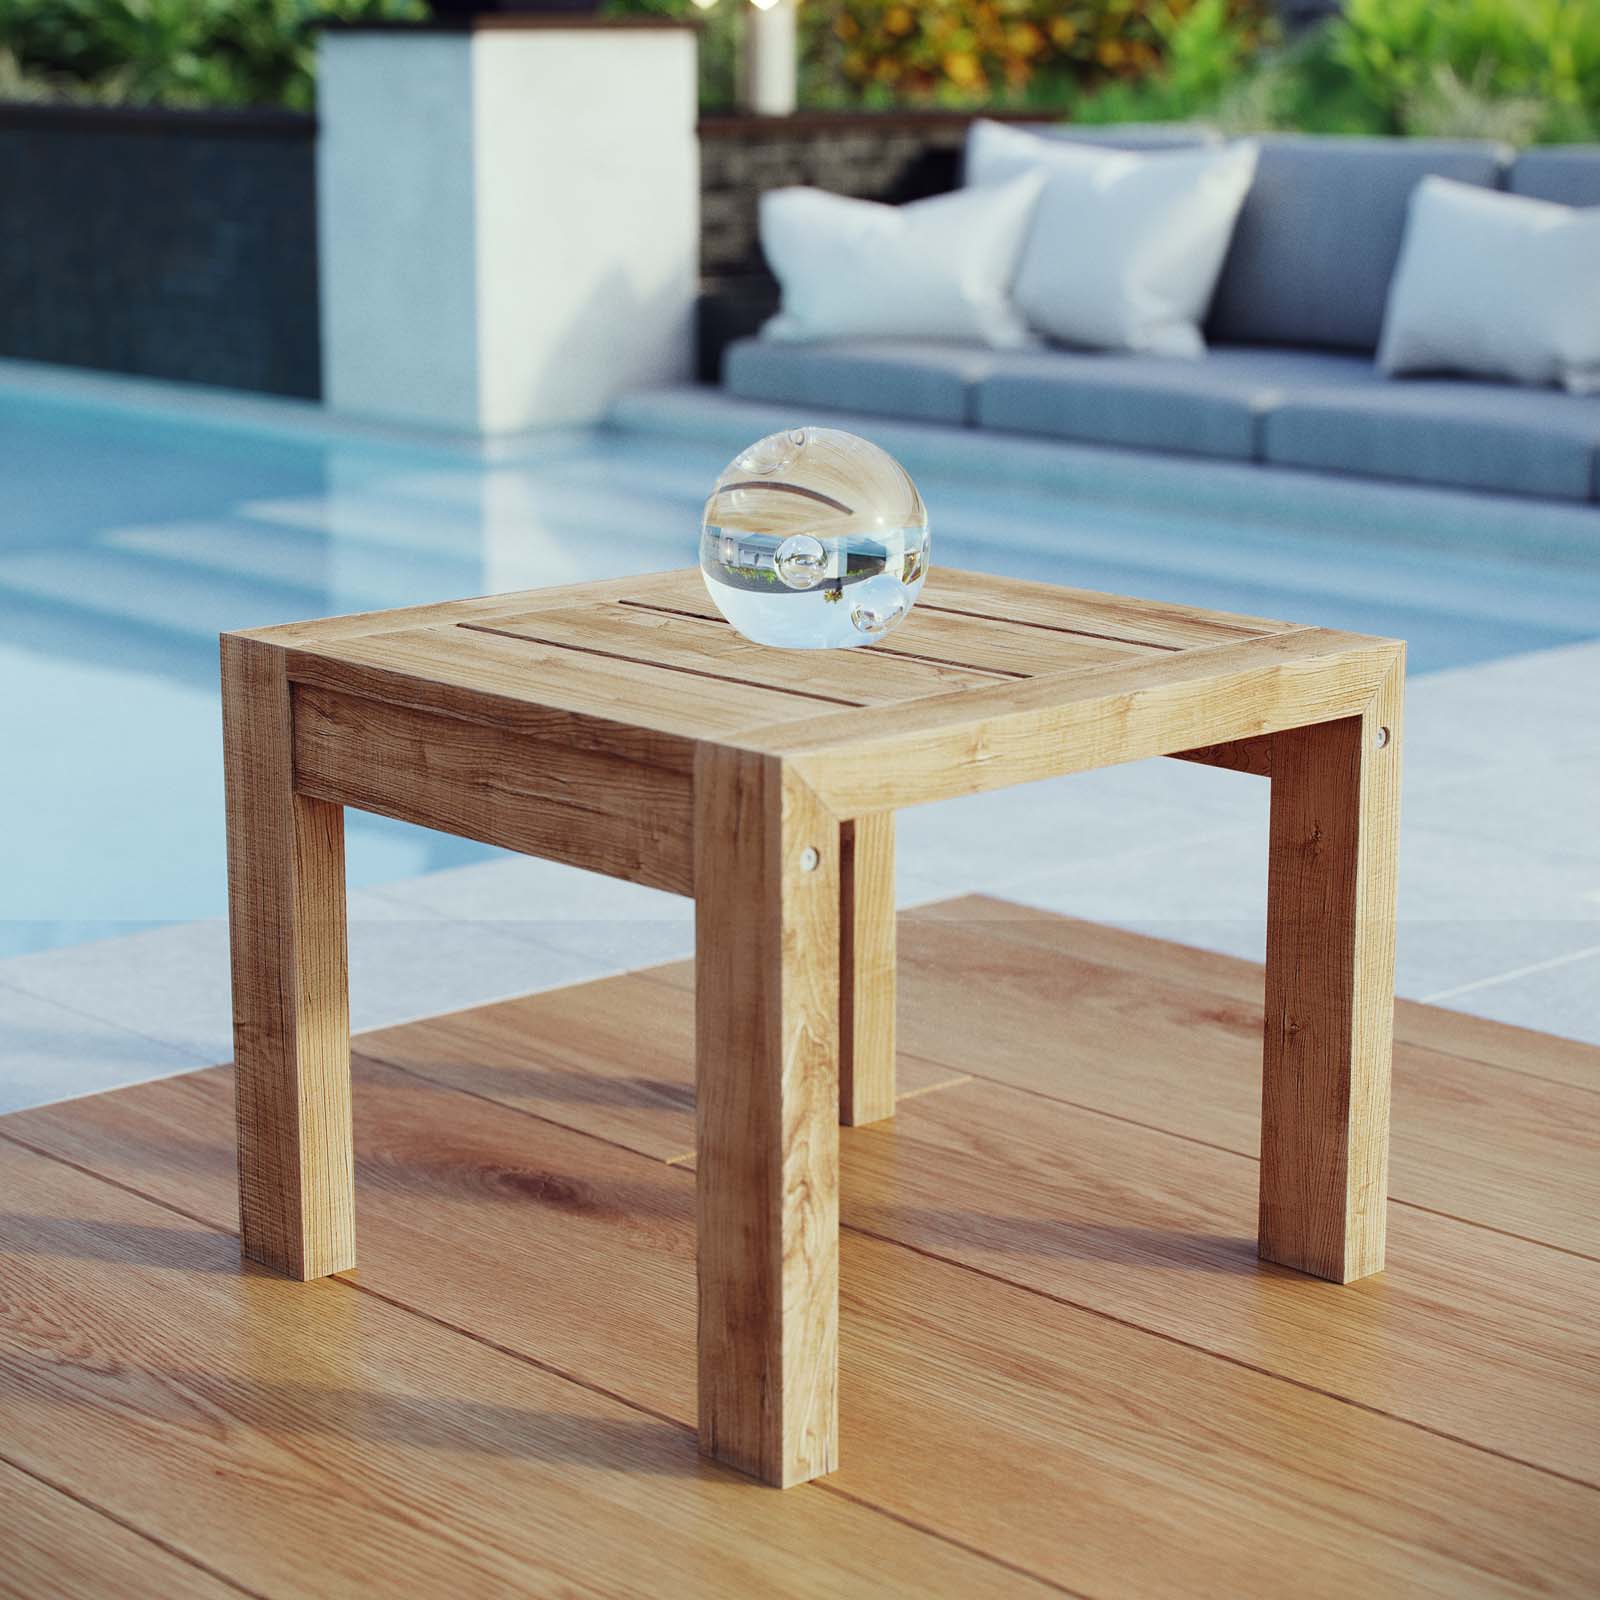 Upland Outdoor Patio Wood Side Table - East Shore Modern Home Furnishings